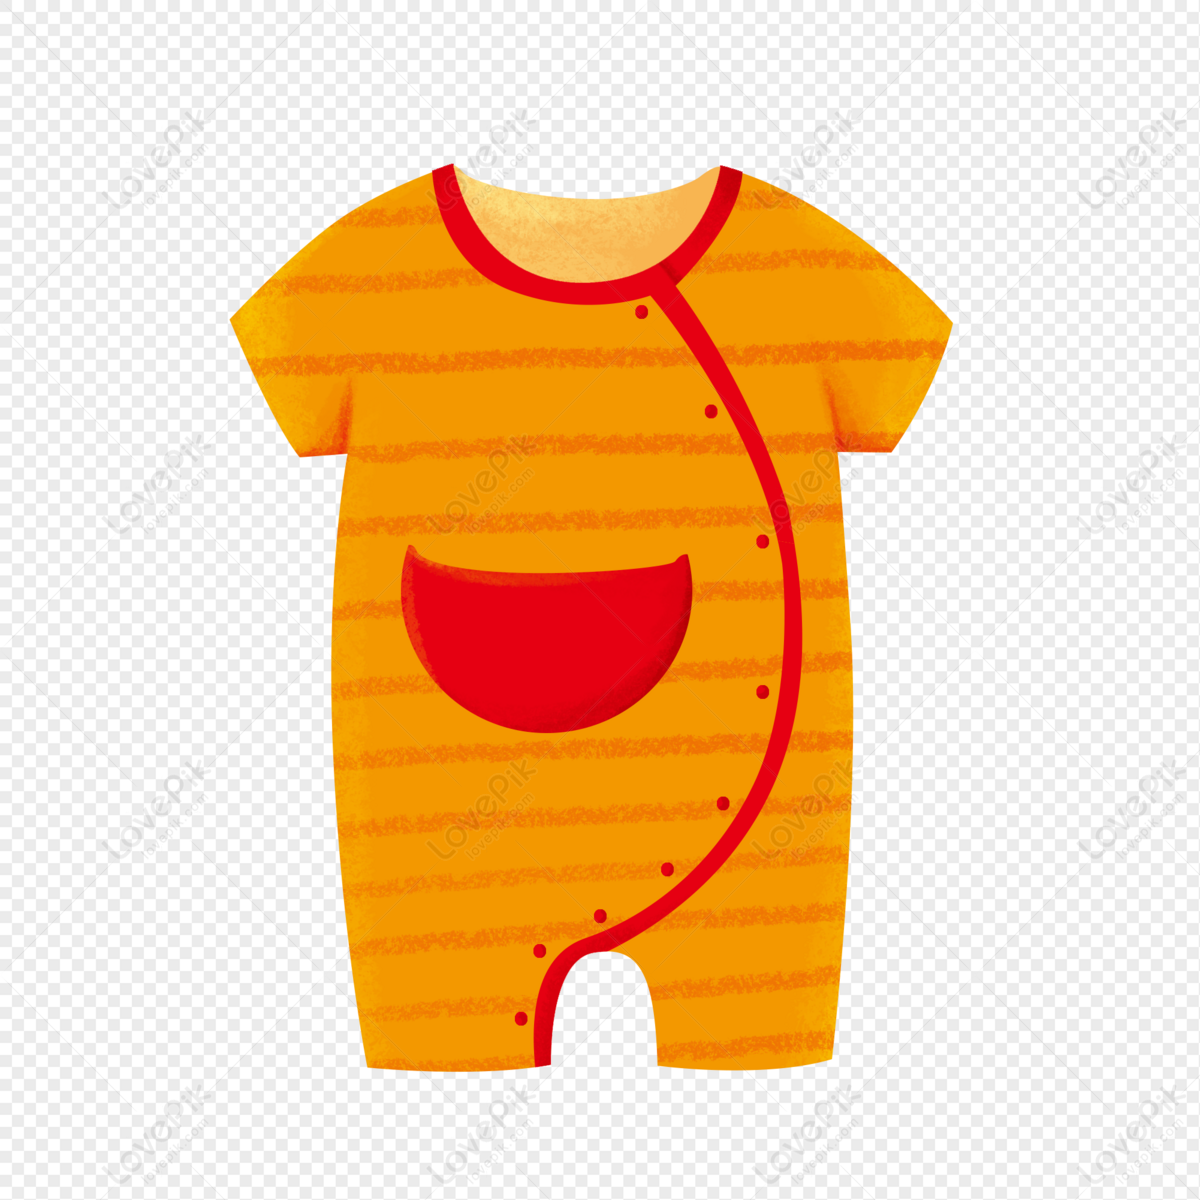 Clothes, Baby Outfit, Orange Yellow, Color Paper PNG Transparent ...